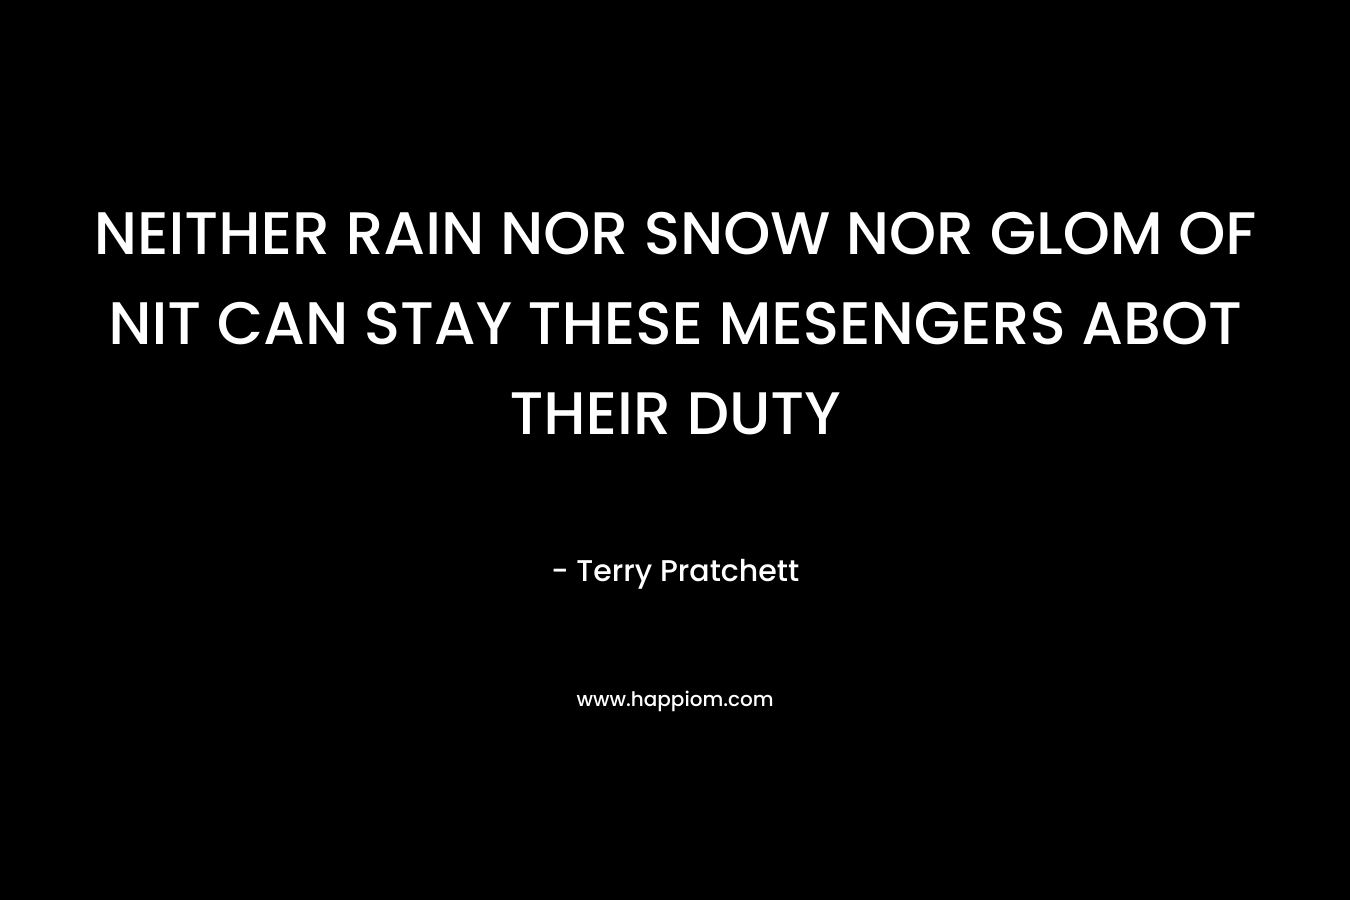 NEITHER RAIN NOR SNOW NOR GLOM OF NIT CAN STAY THESE MESENGERS ABOT THEIR DUTY